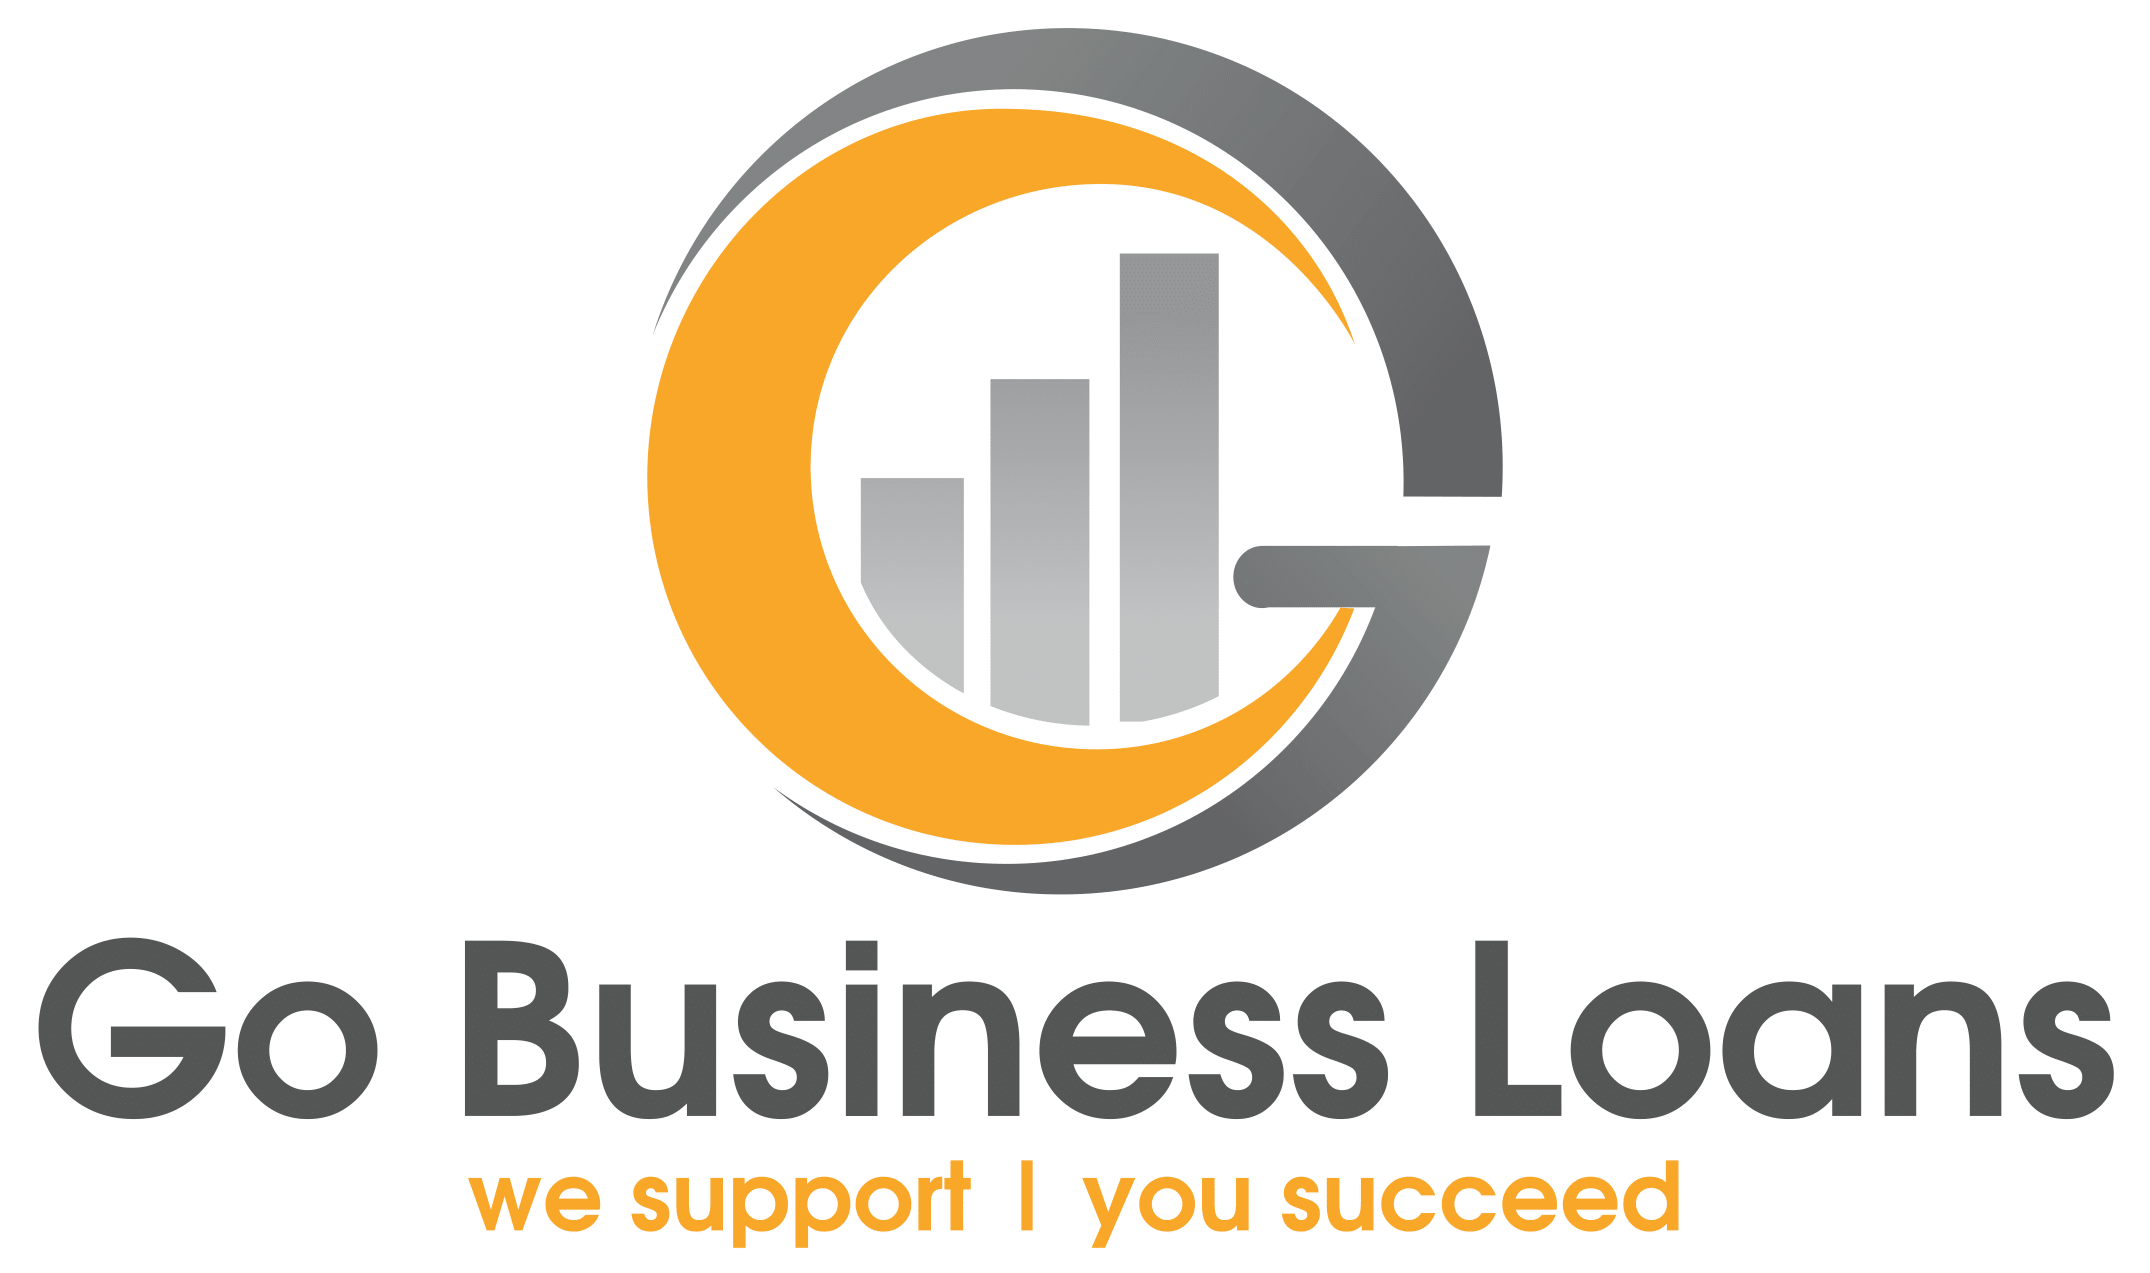 Go Business Loans secures investment to continue support to SMEs